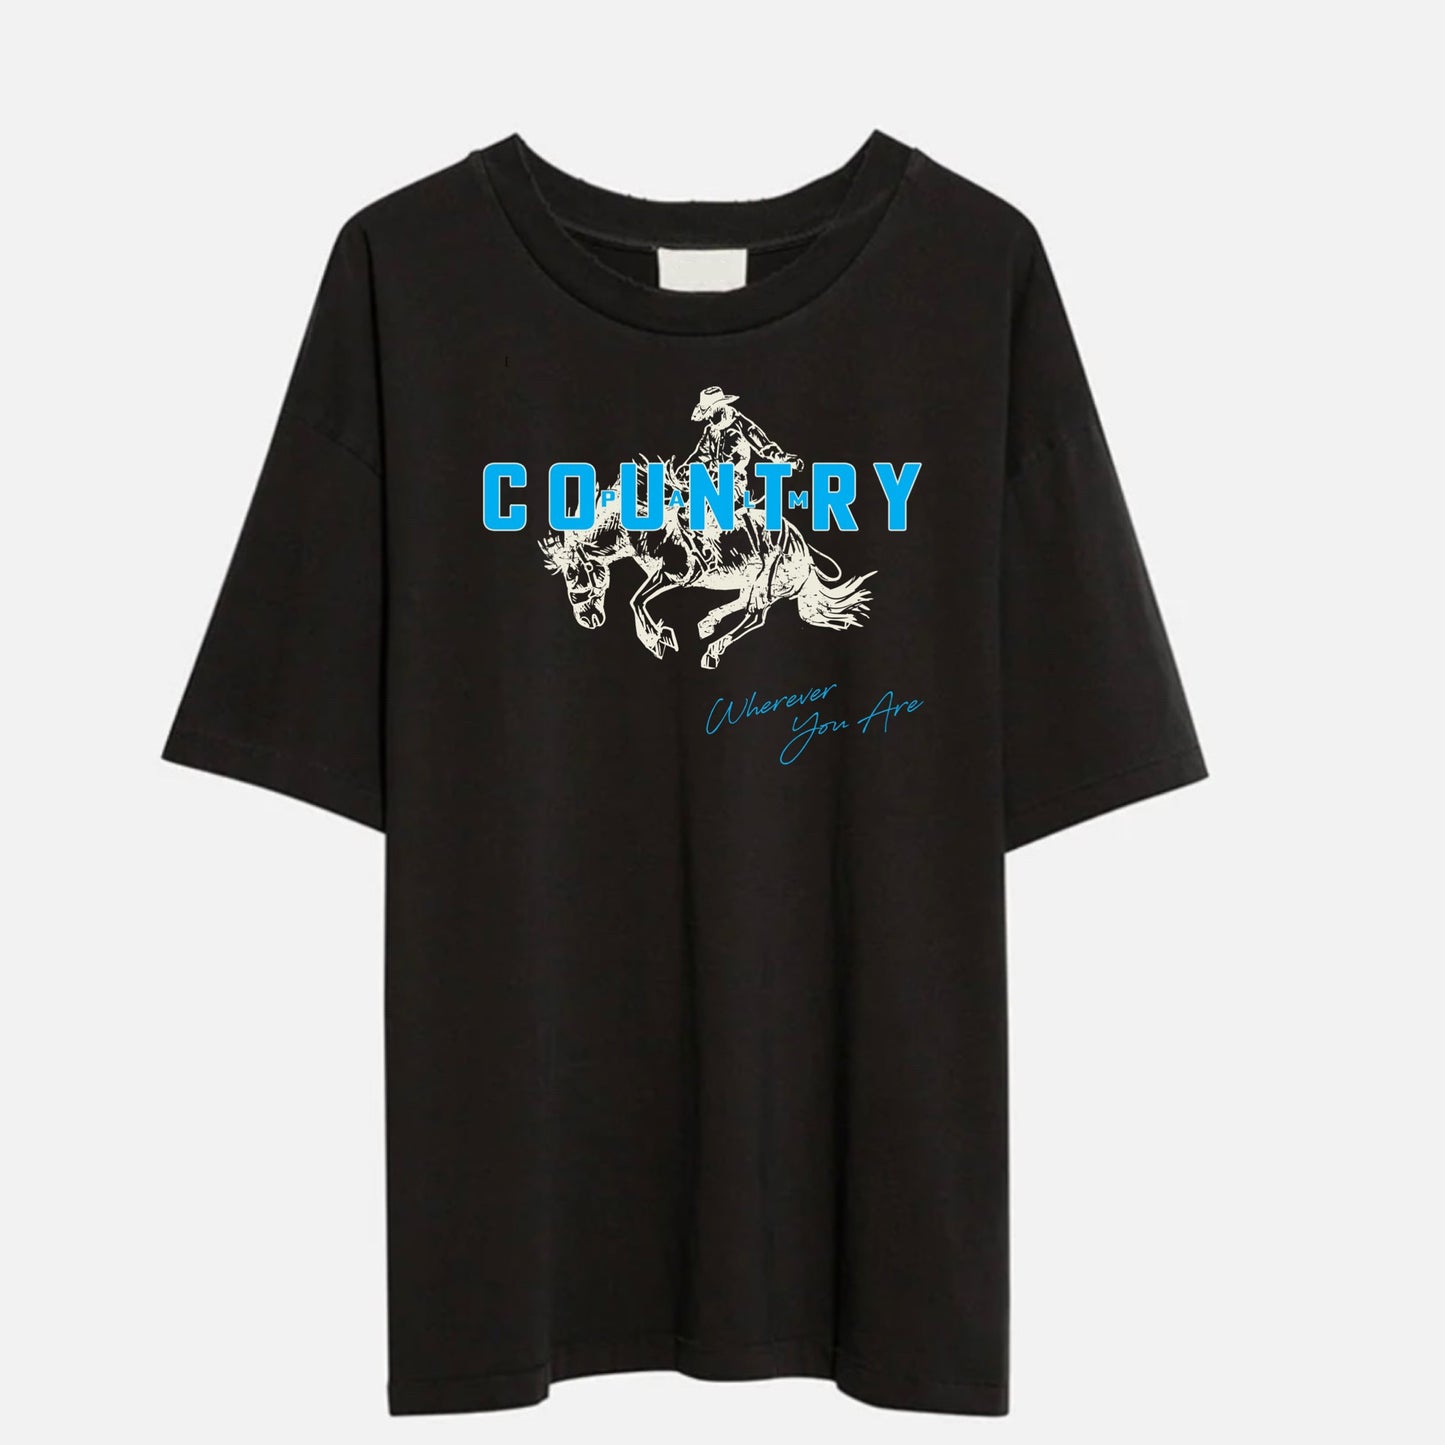 a black t - shirt with the words country printed on it